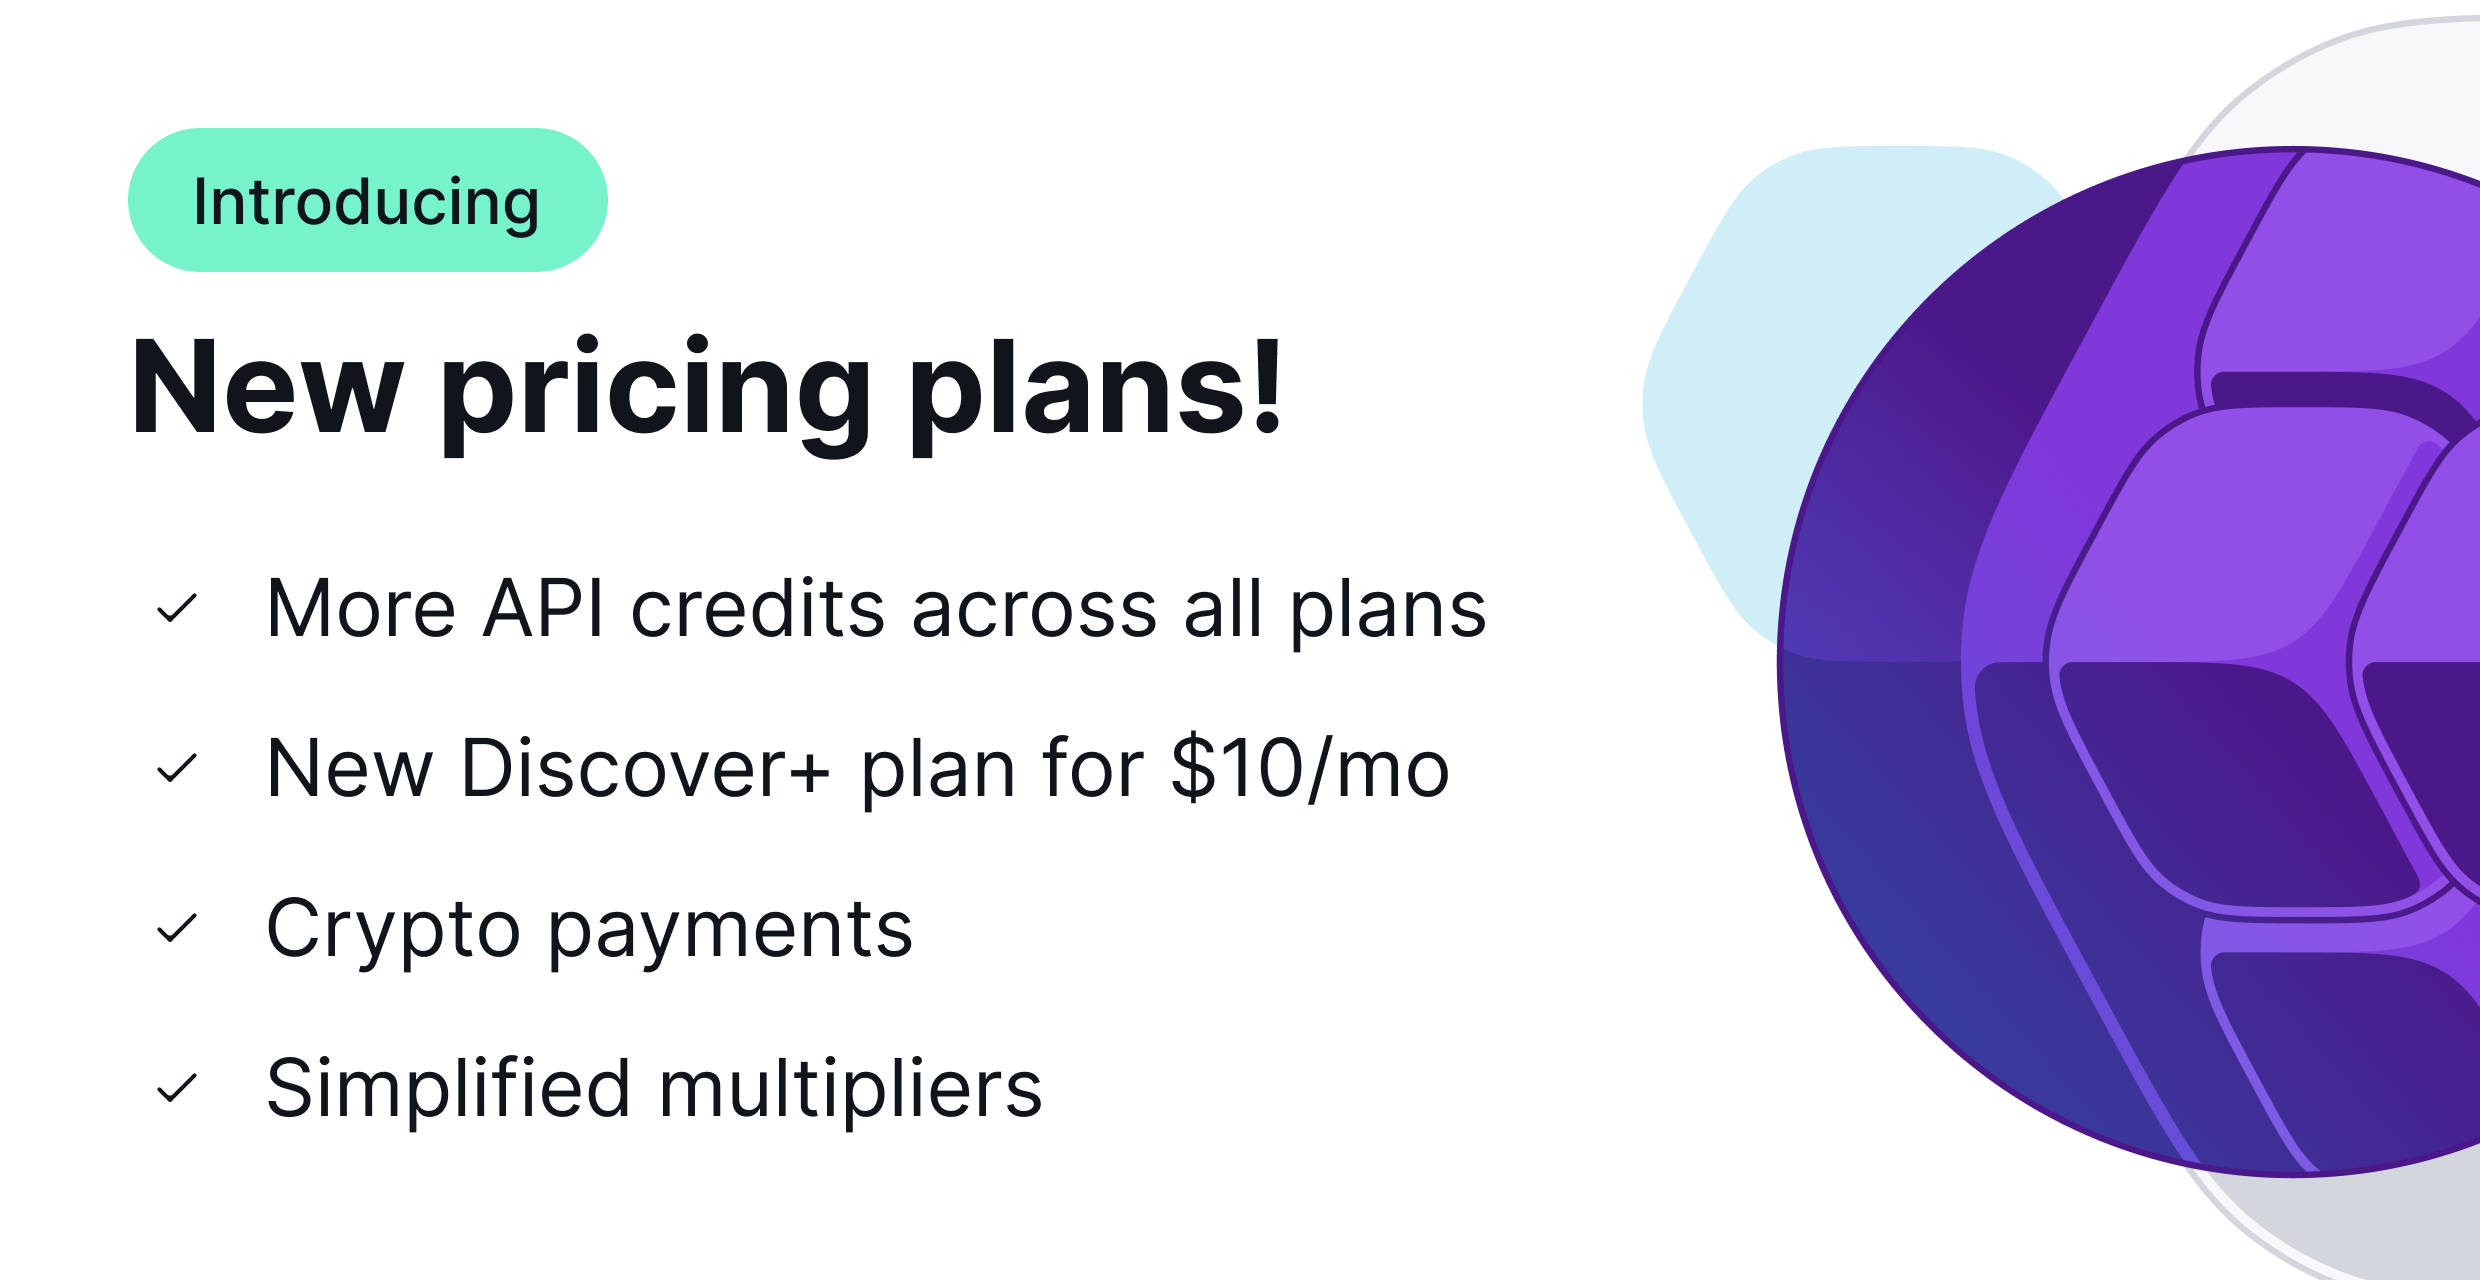 Introducing QuickNode's New Pricing and Plans!